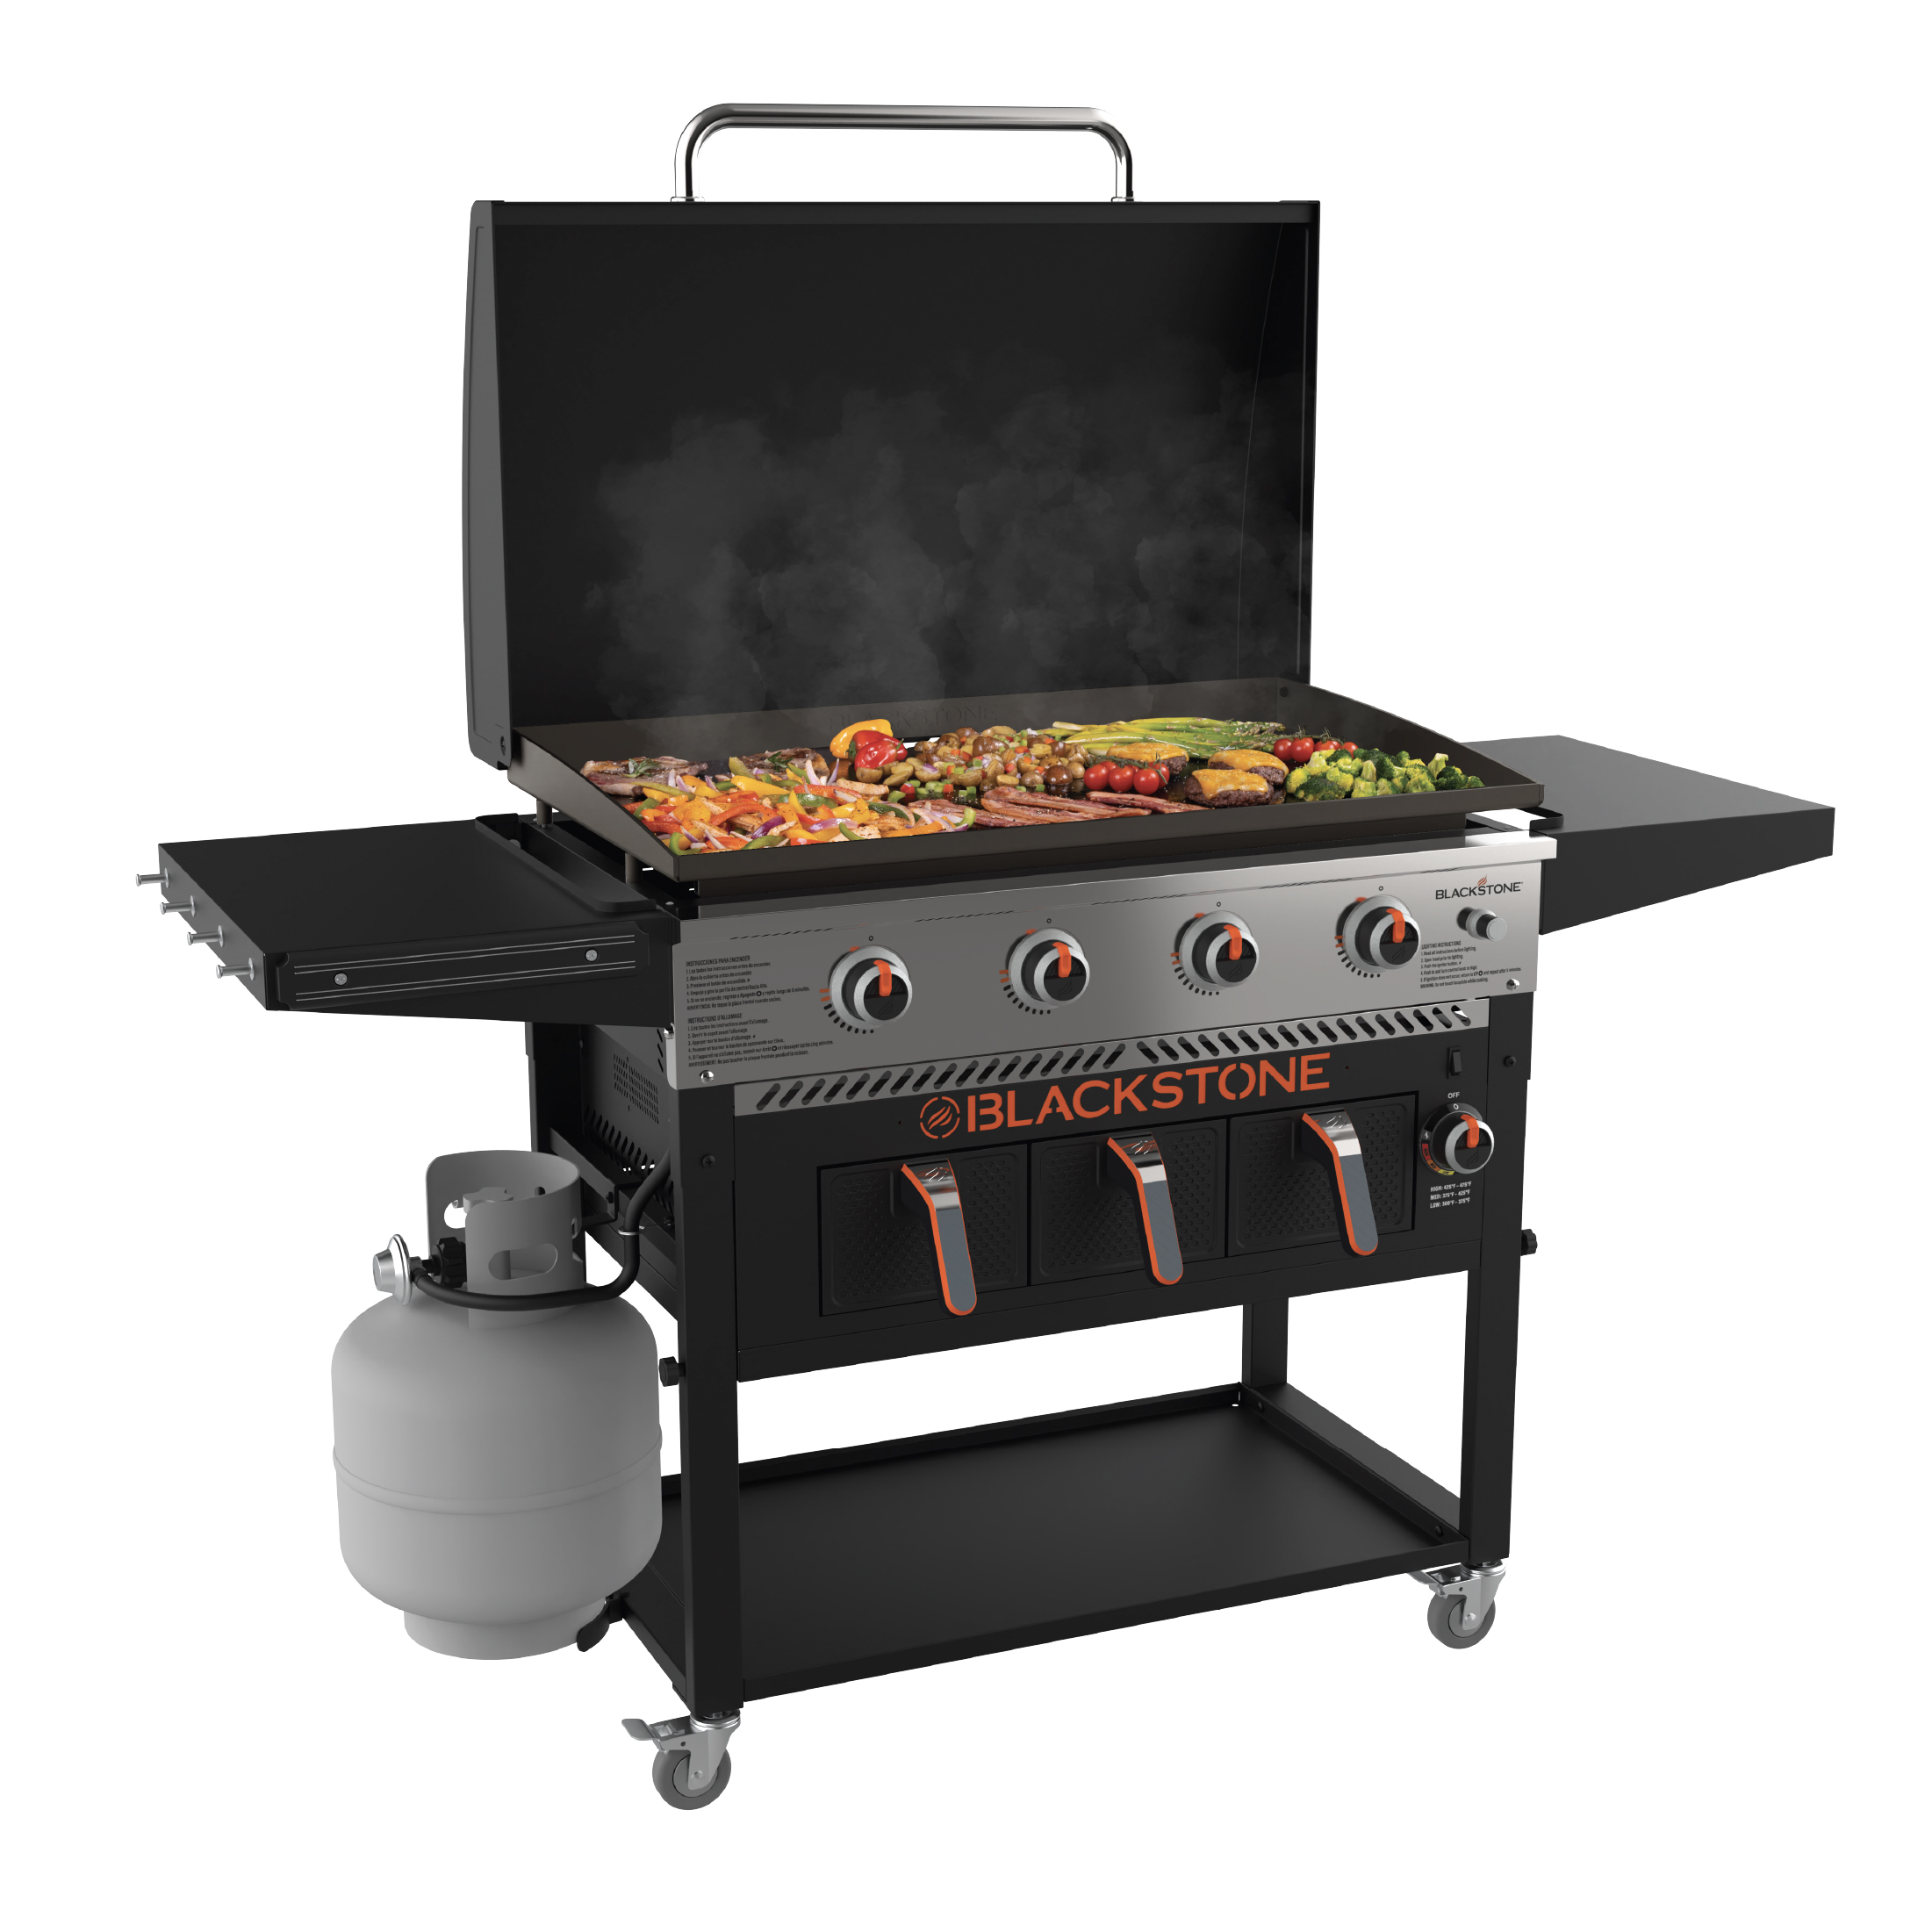 Blackstone 4-Burner 36" Propane Griddle with Air Fryer and Hood - image 1 of 23